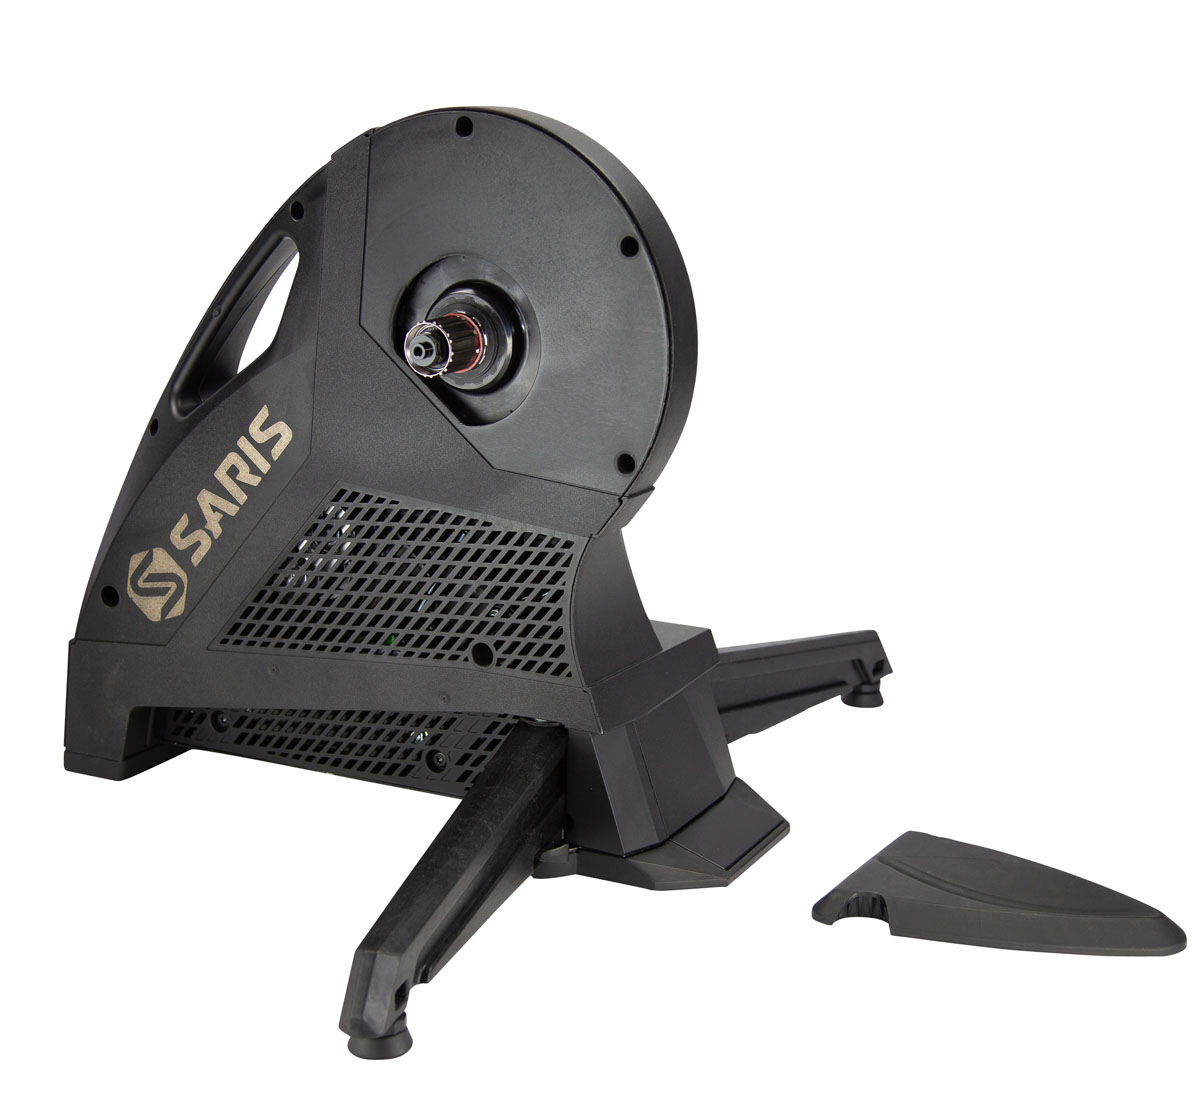 Saris MP1 TRainer Platform moves to Nfinity, H3 direct drive smart trainer is quietest yet